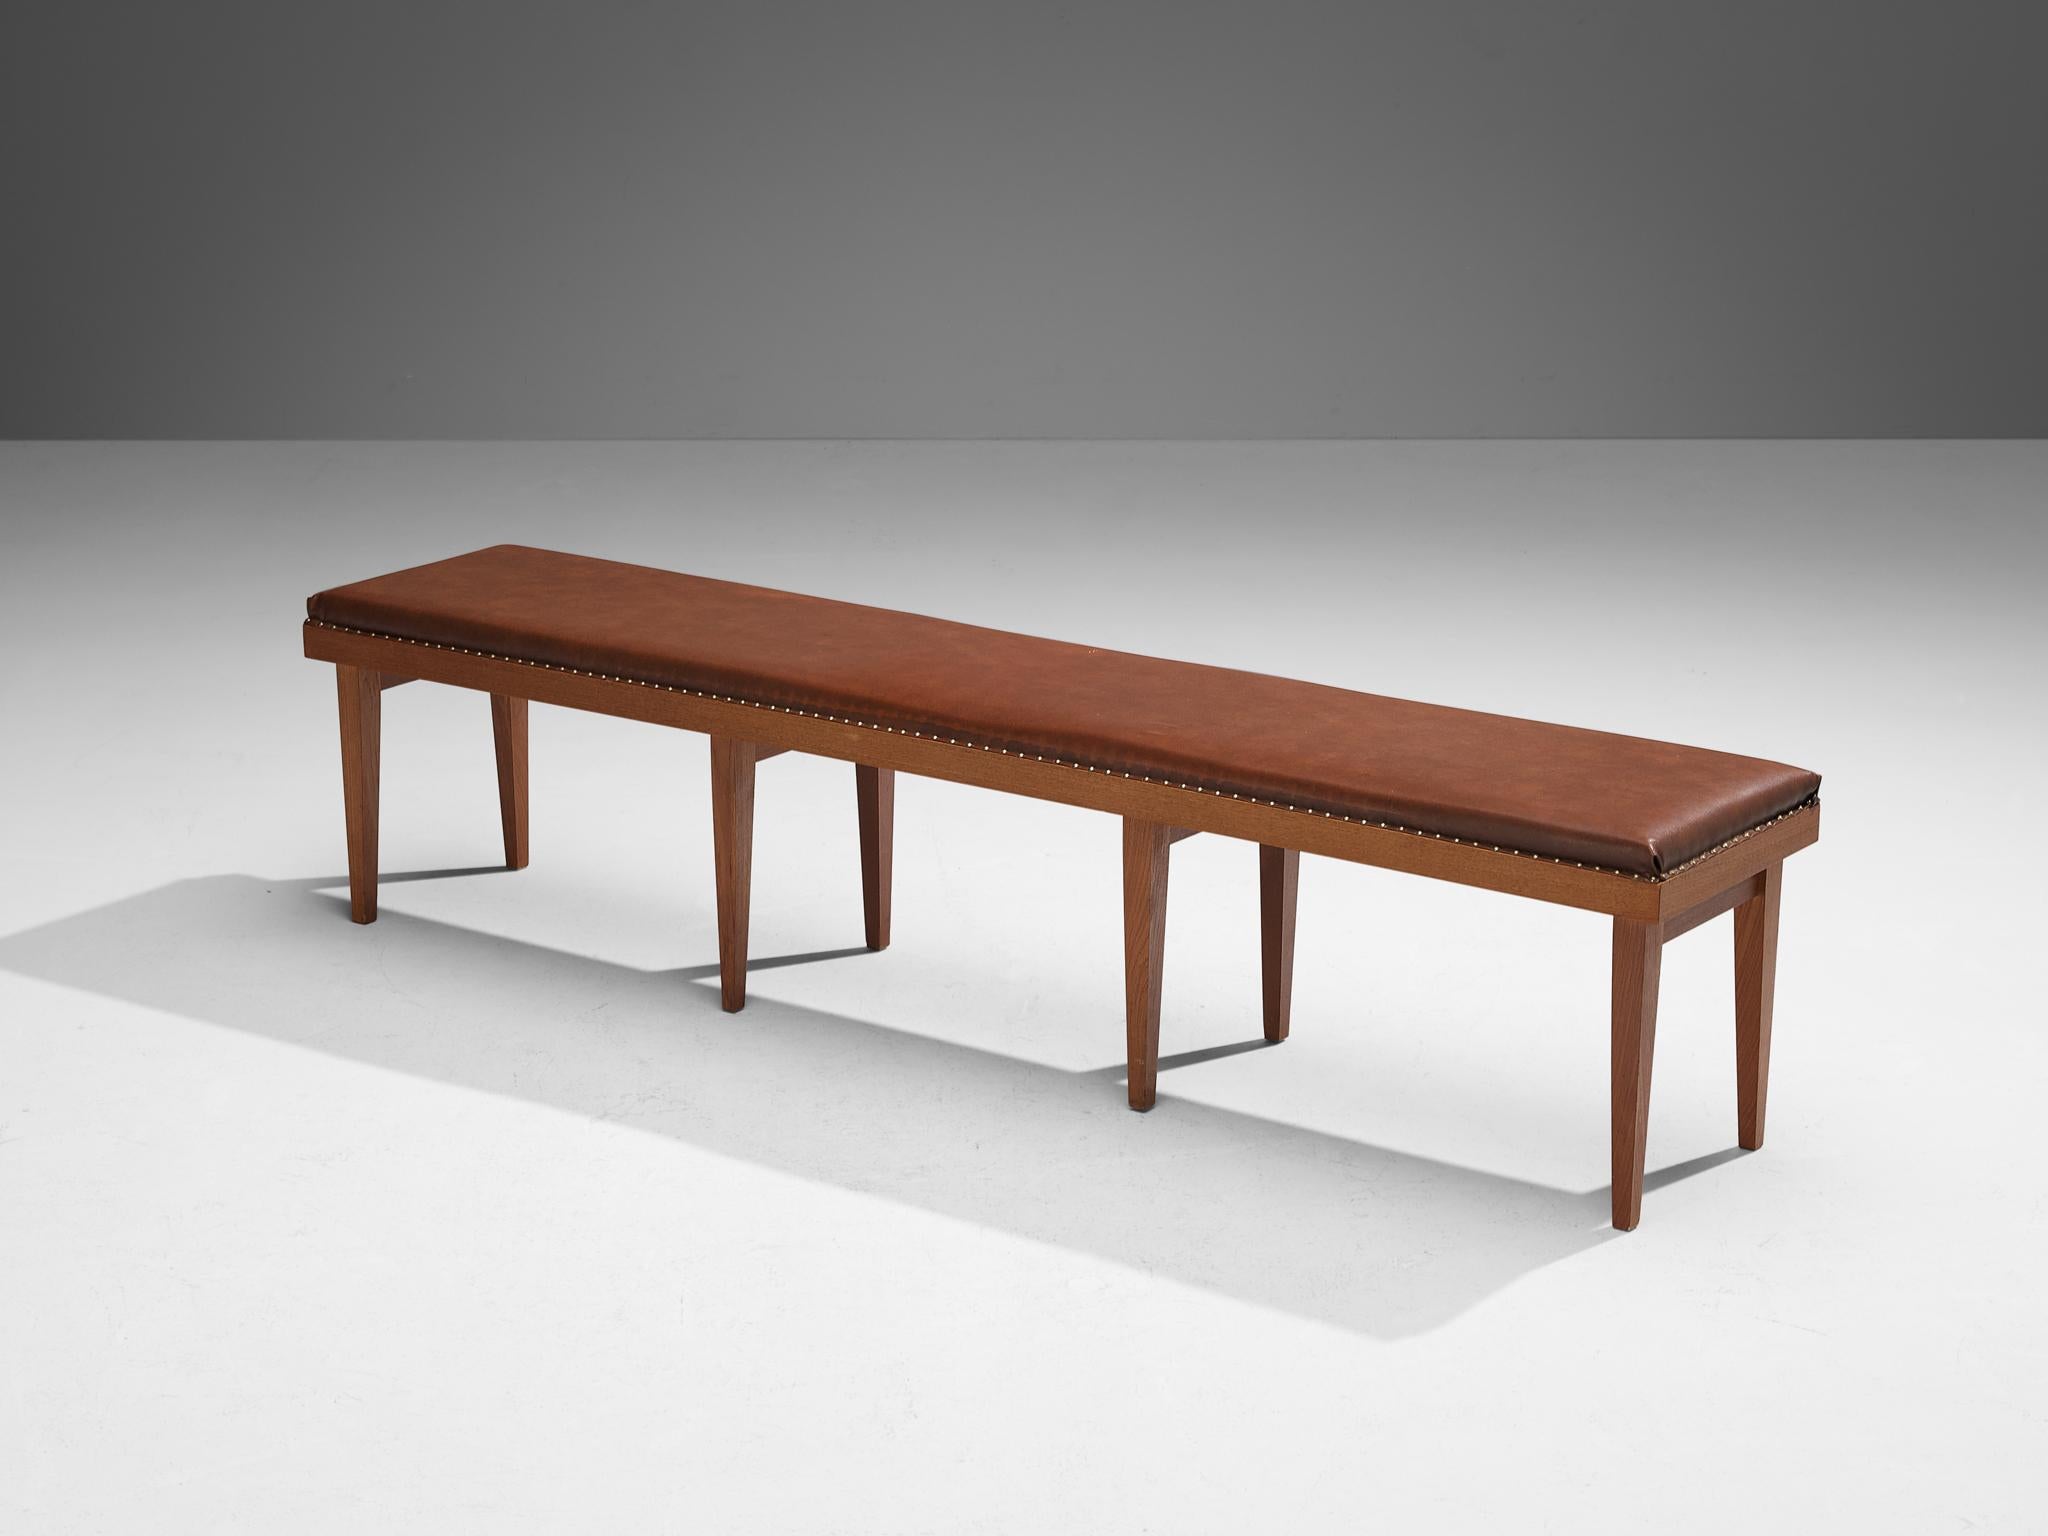 Large bench, faux leather, teak, brass, Scandinavia, 1950s

A charming furniture piece exuding a sense of harmony and purity. The bench, with its rectangular shape, showcases an upholstered seat in a rich reddish-brown hue. Brass nails run along the